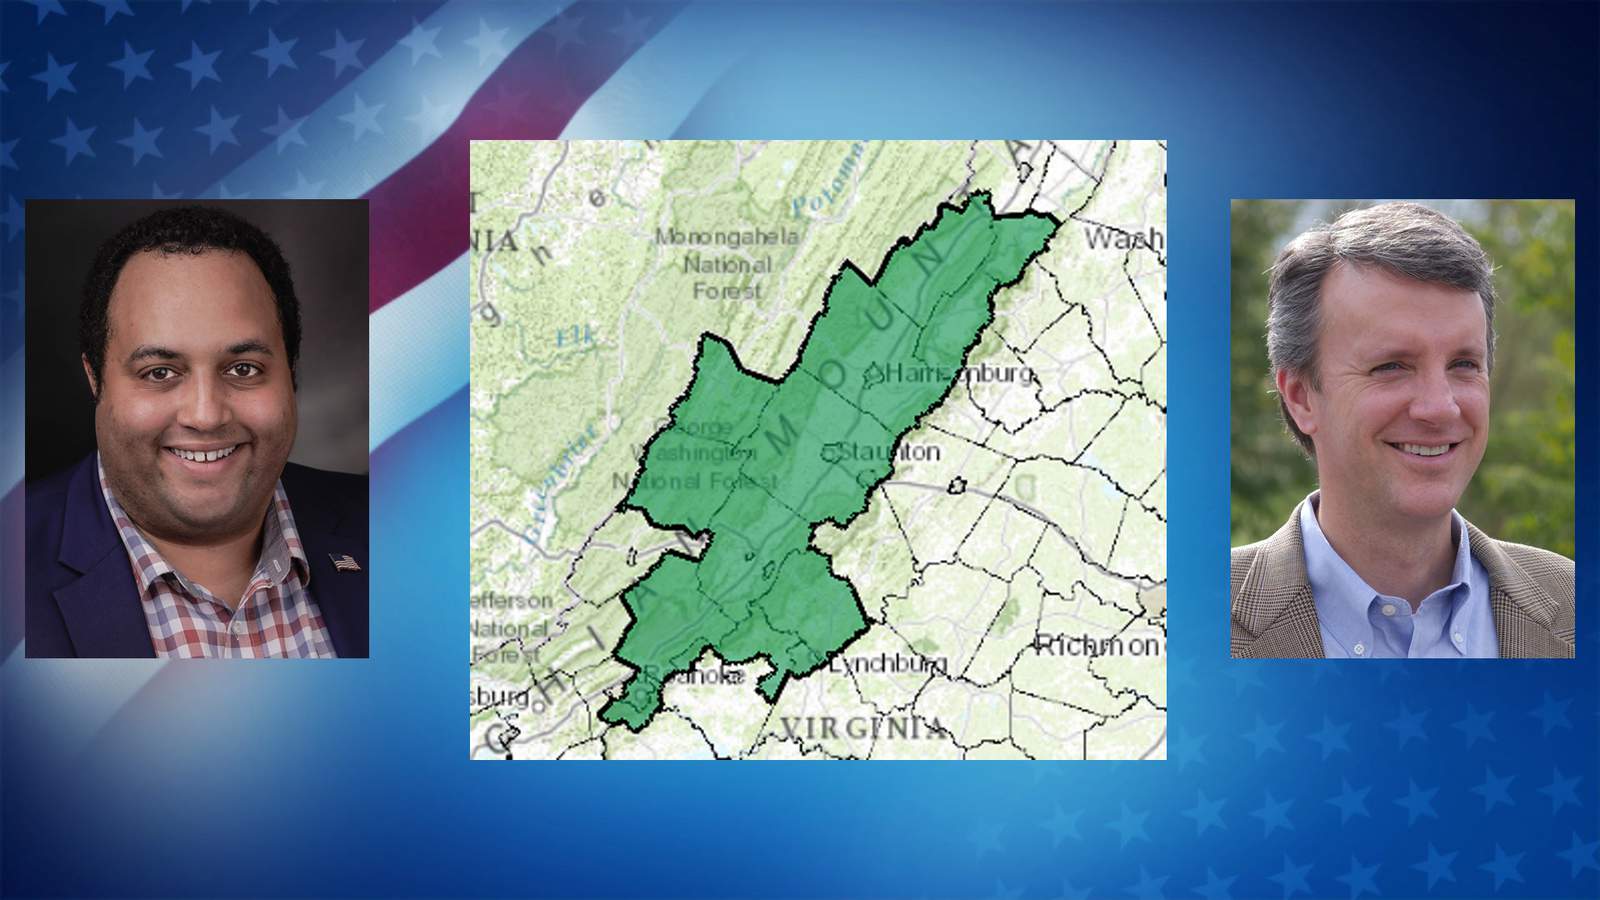 Results by locality for Virginia’s 6th Congressional District race between Cline and Betts